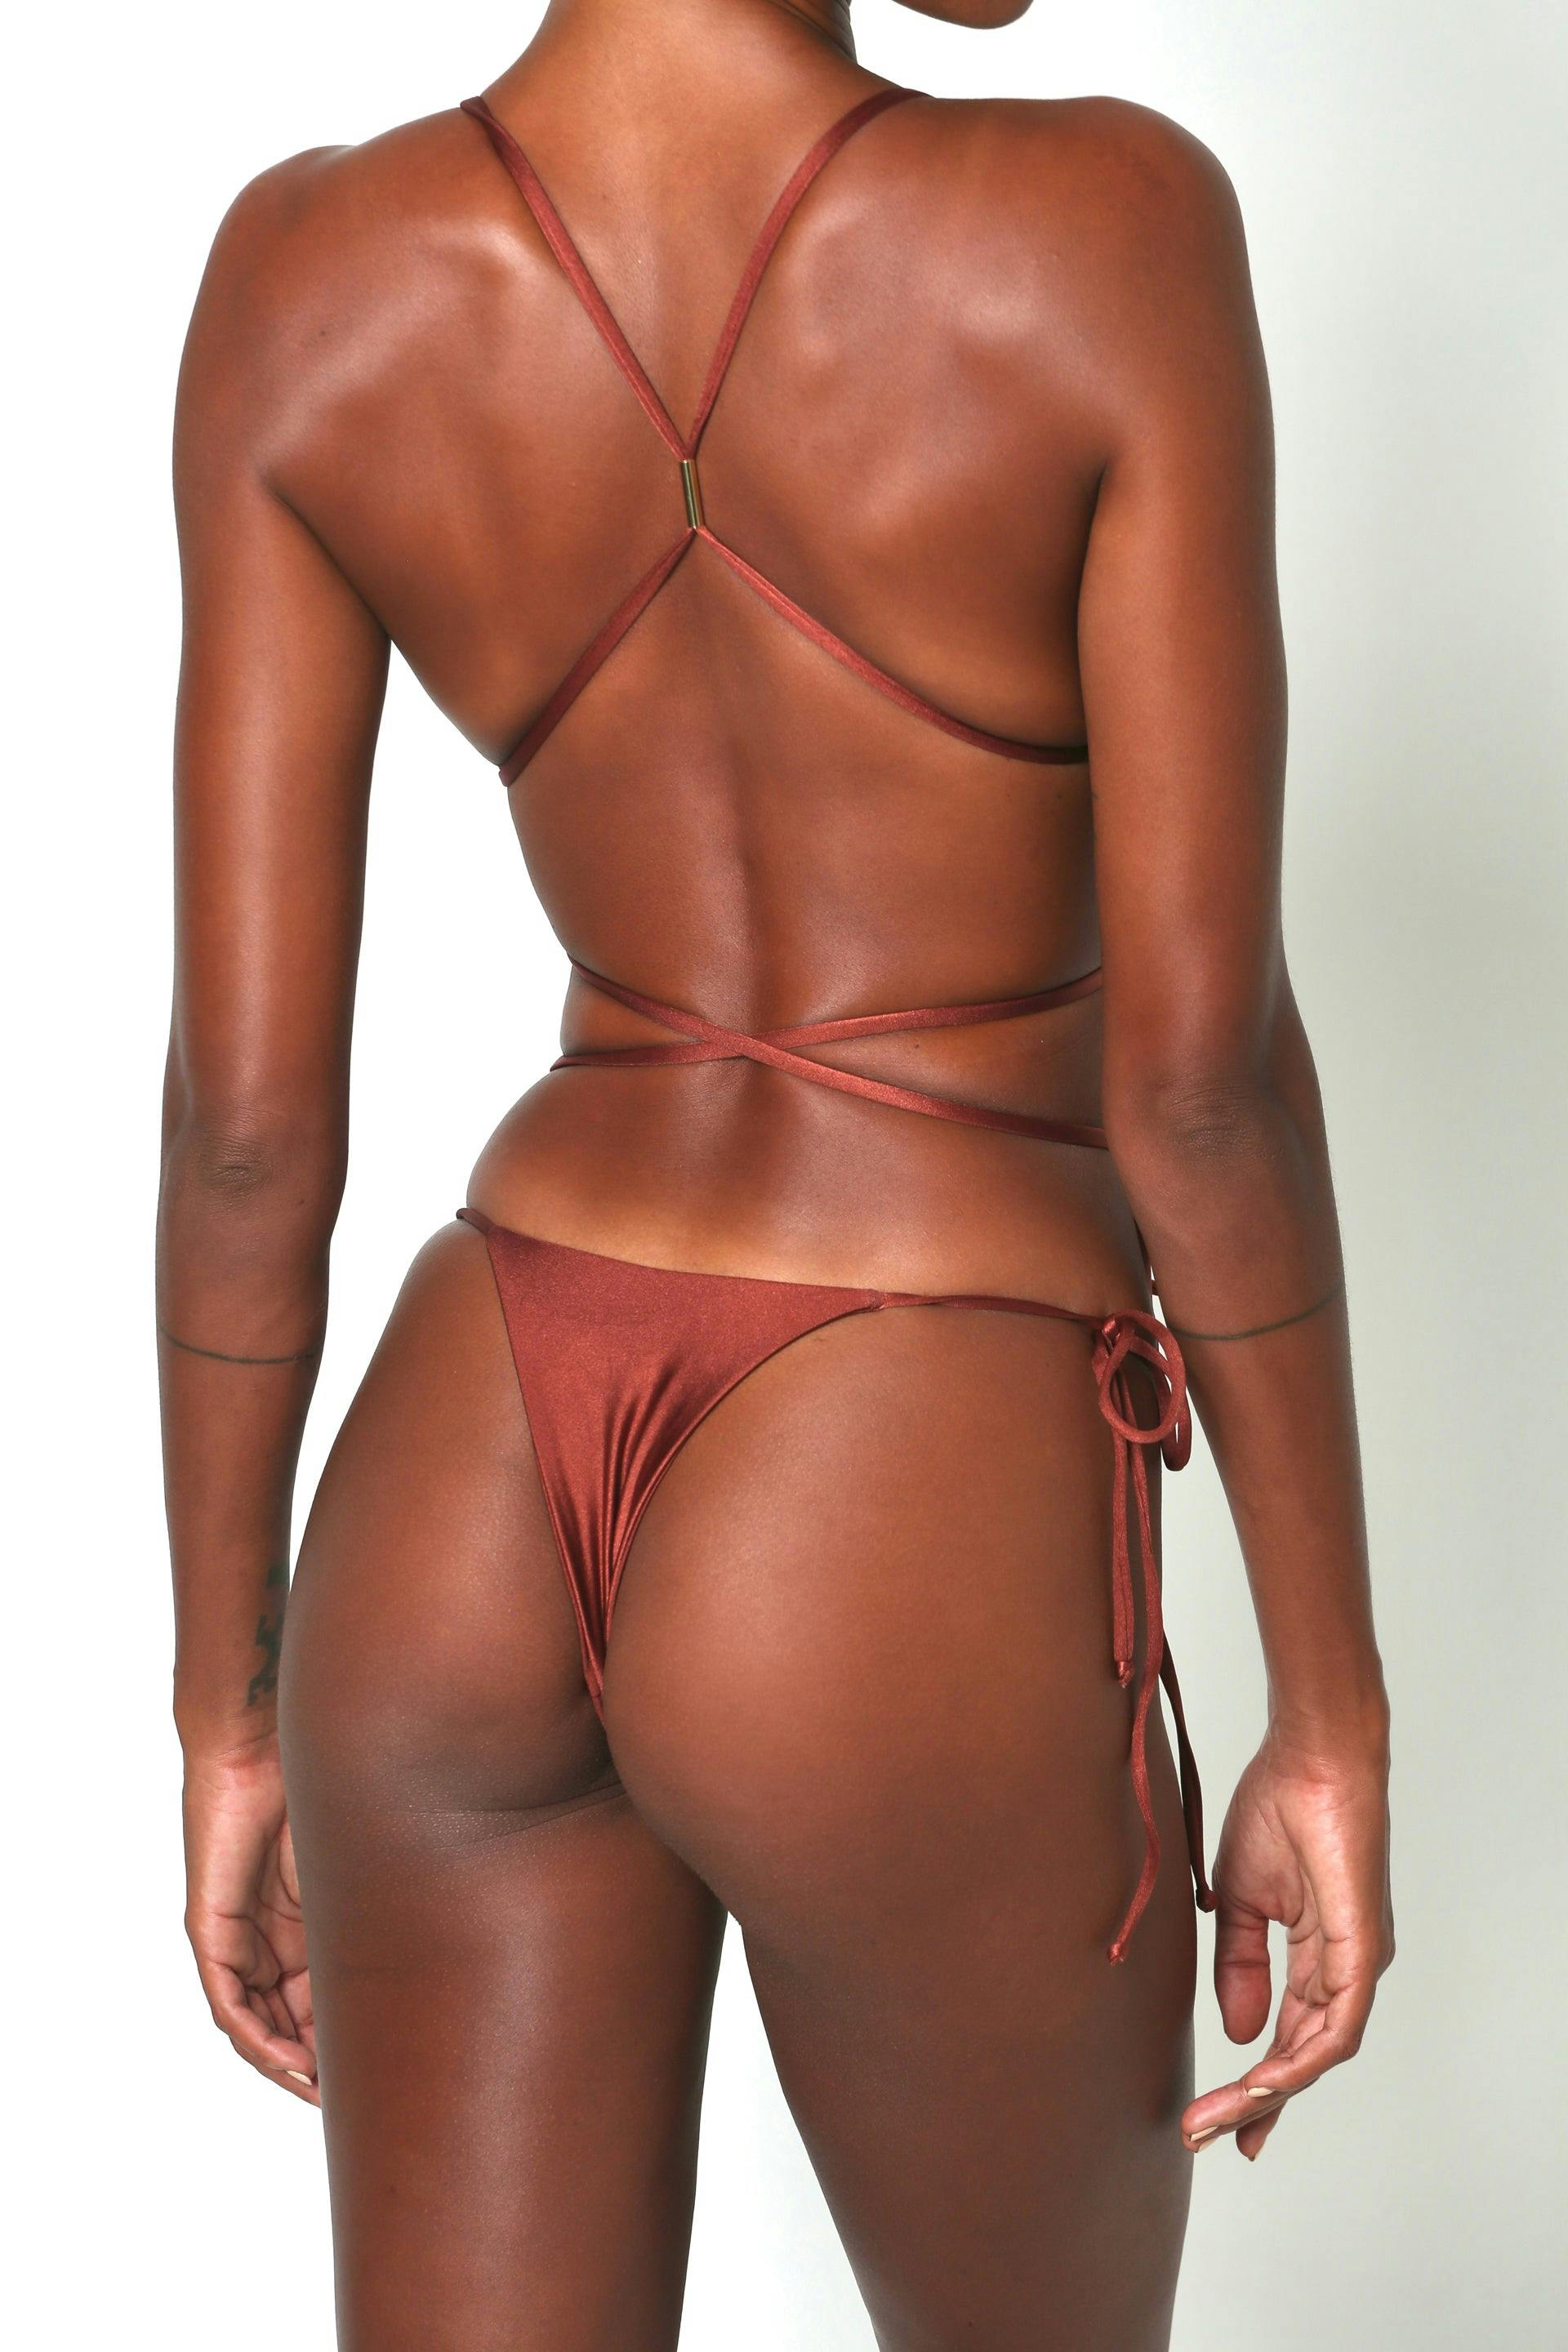 The Maathai Bottom Cinnamon, a product by Tigra the Label